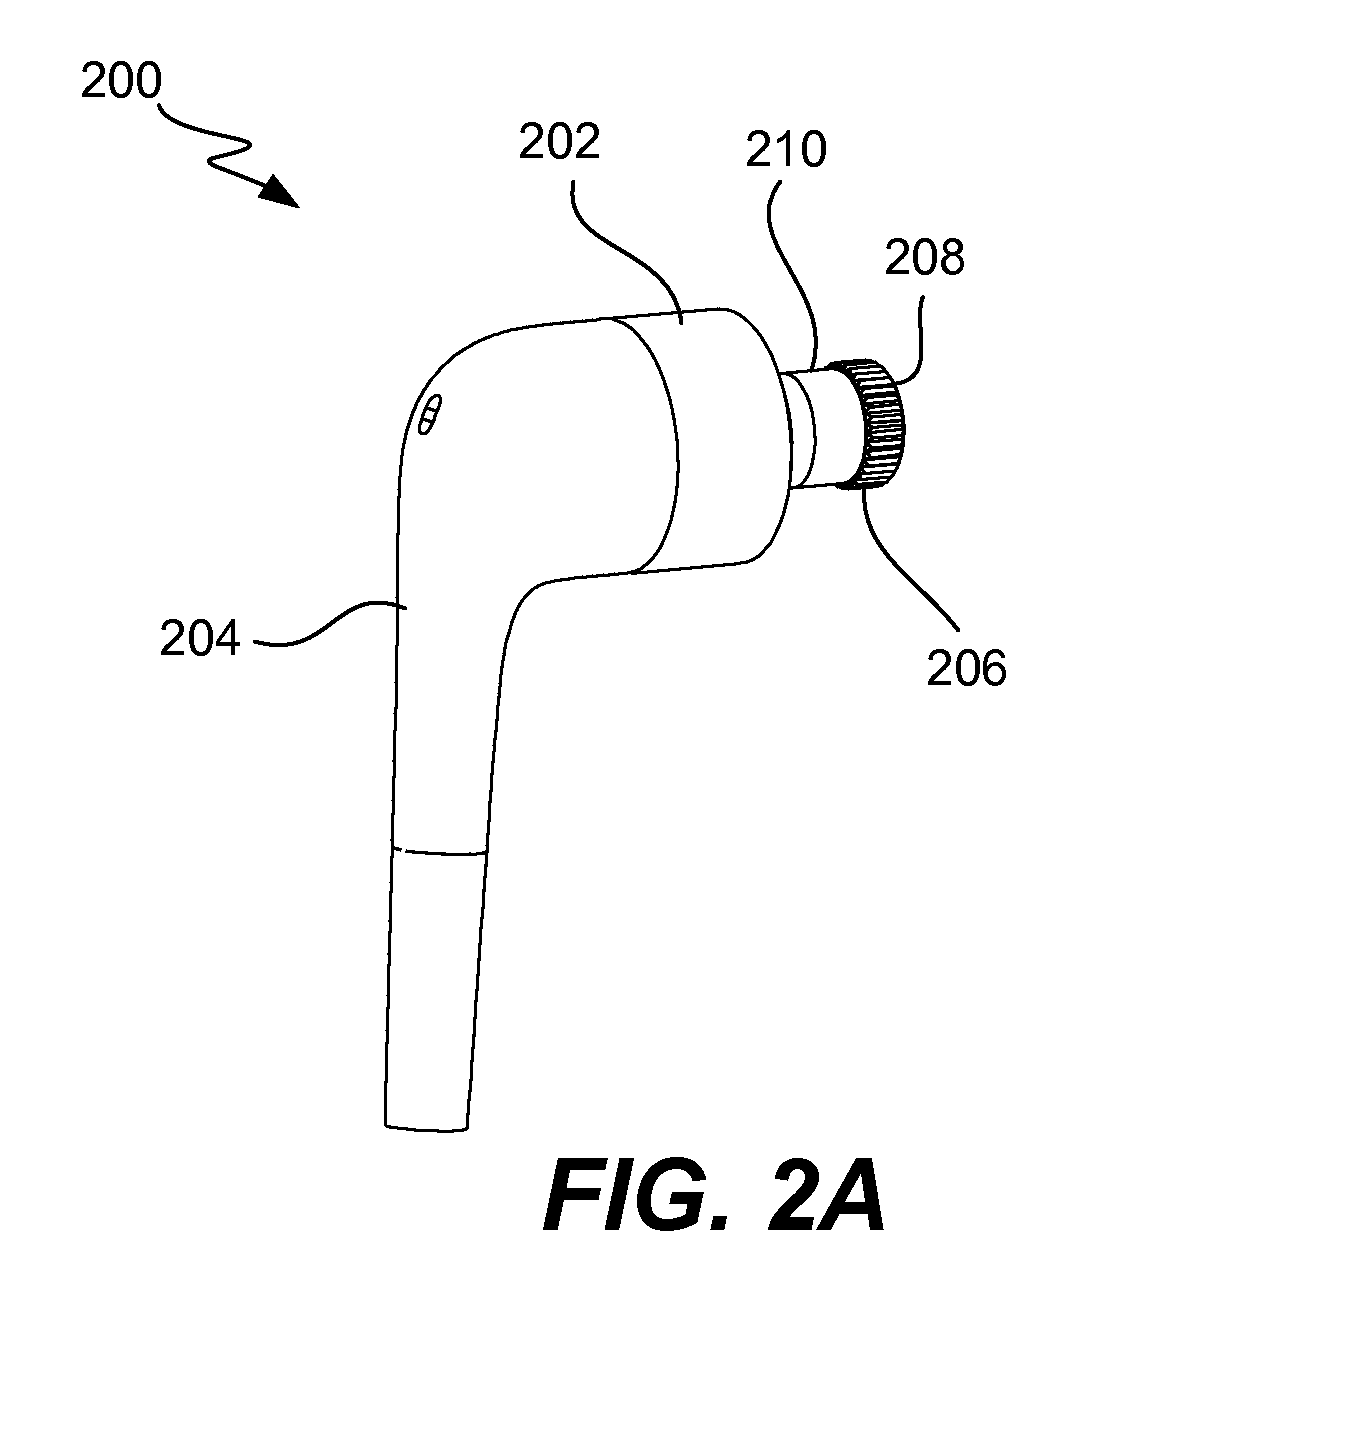 Deformable Ear Tip for Earphone and Method Therefor